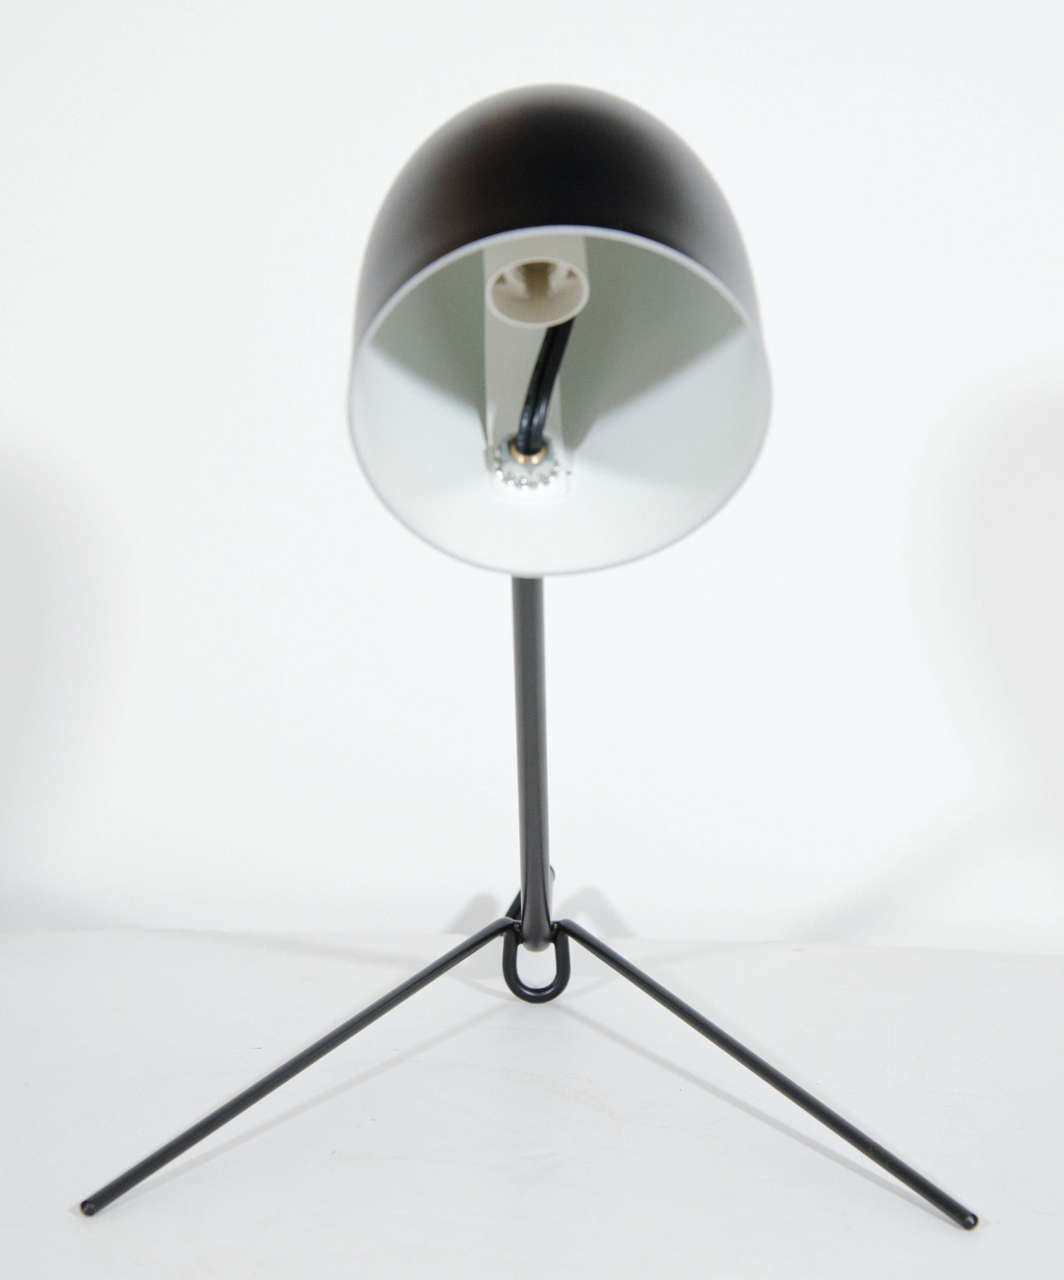 20th Century Modernist Desk Lamp In Sculpted Black Enameled Metal Attributed to Serge Mouille